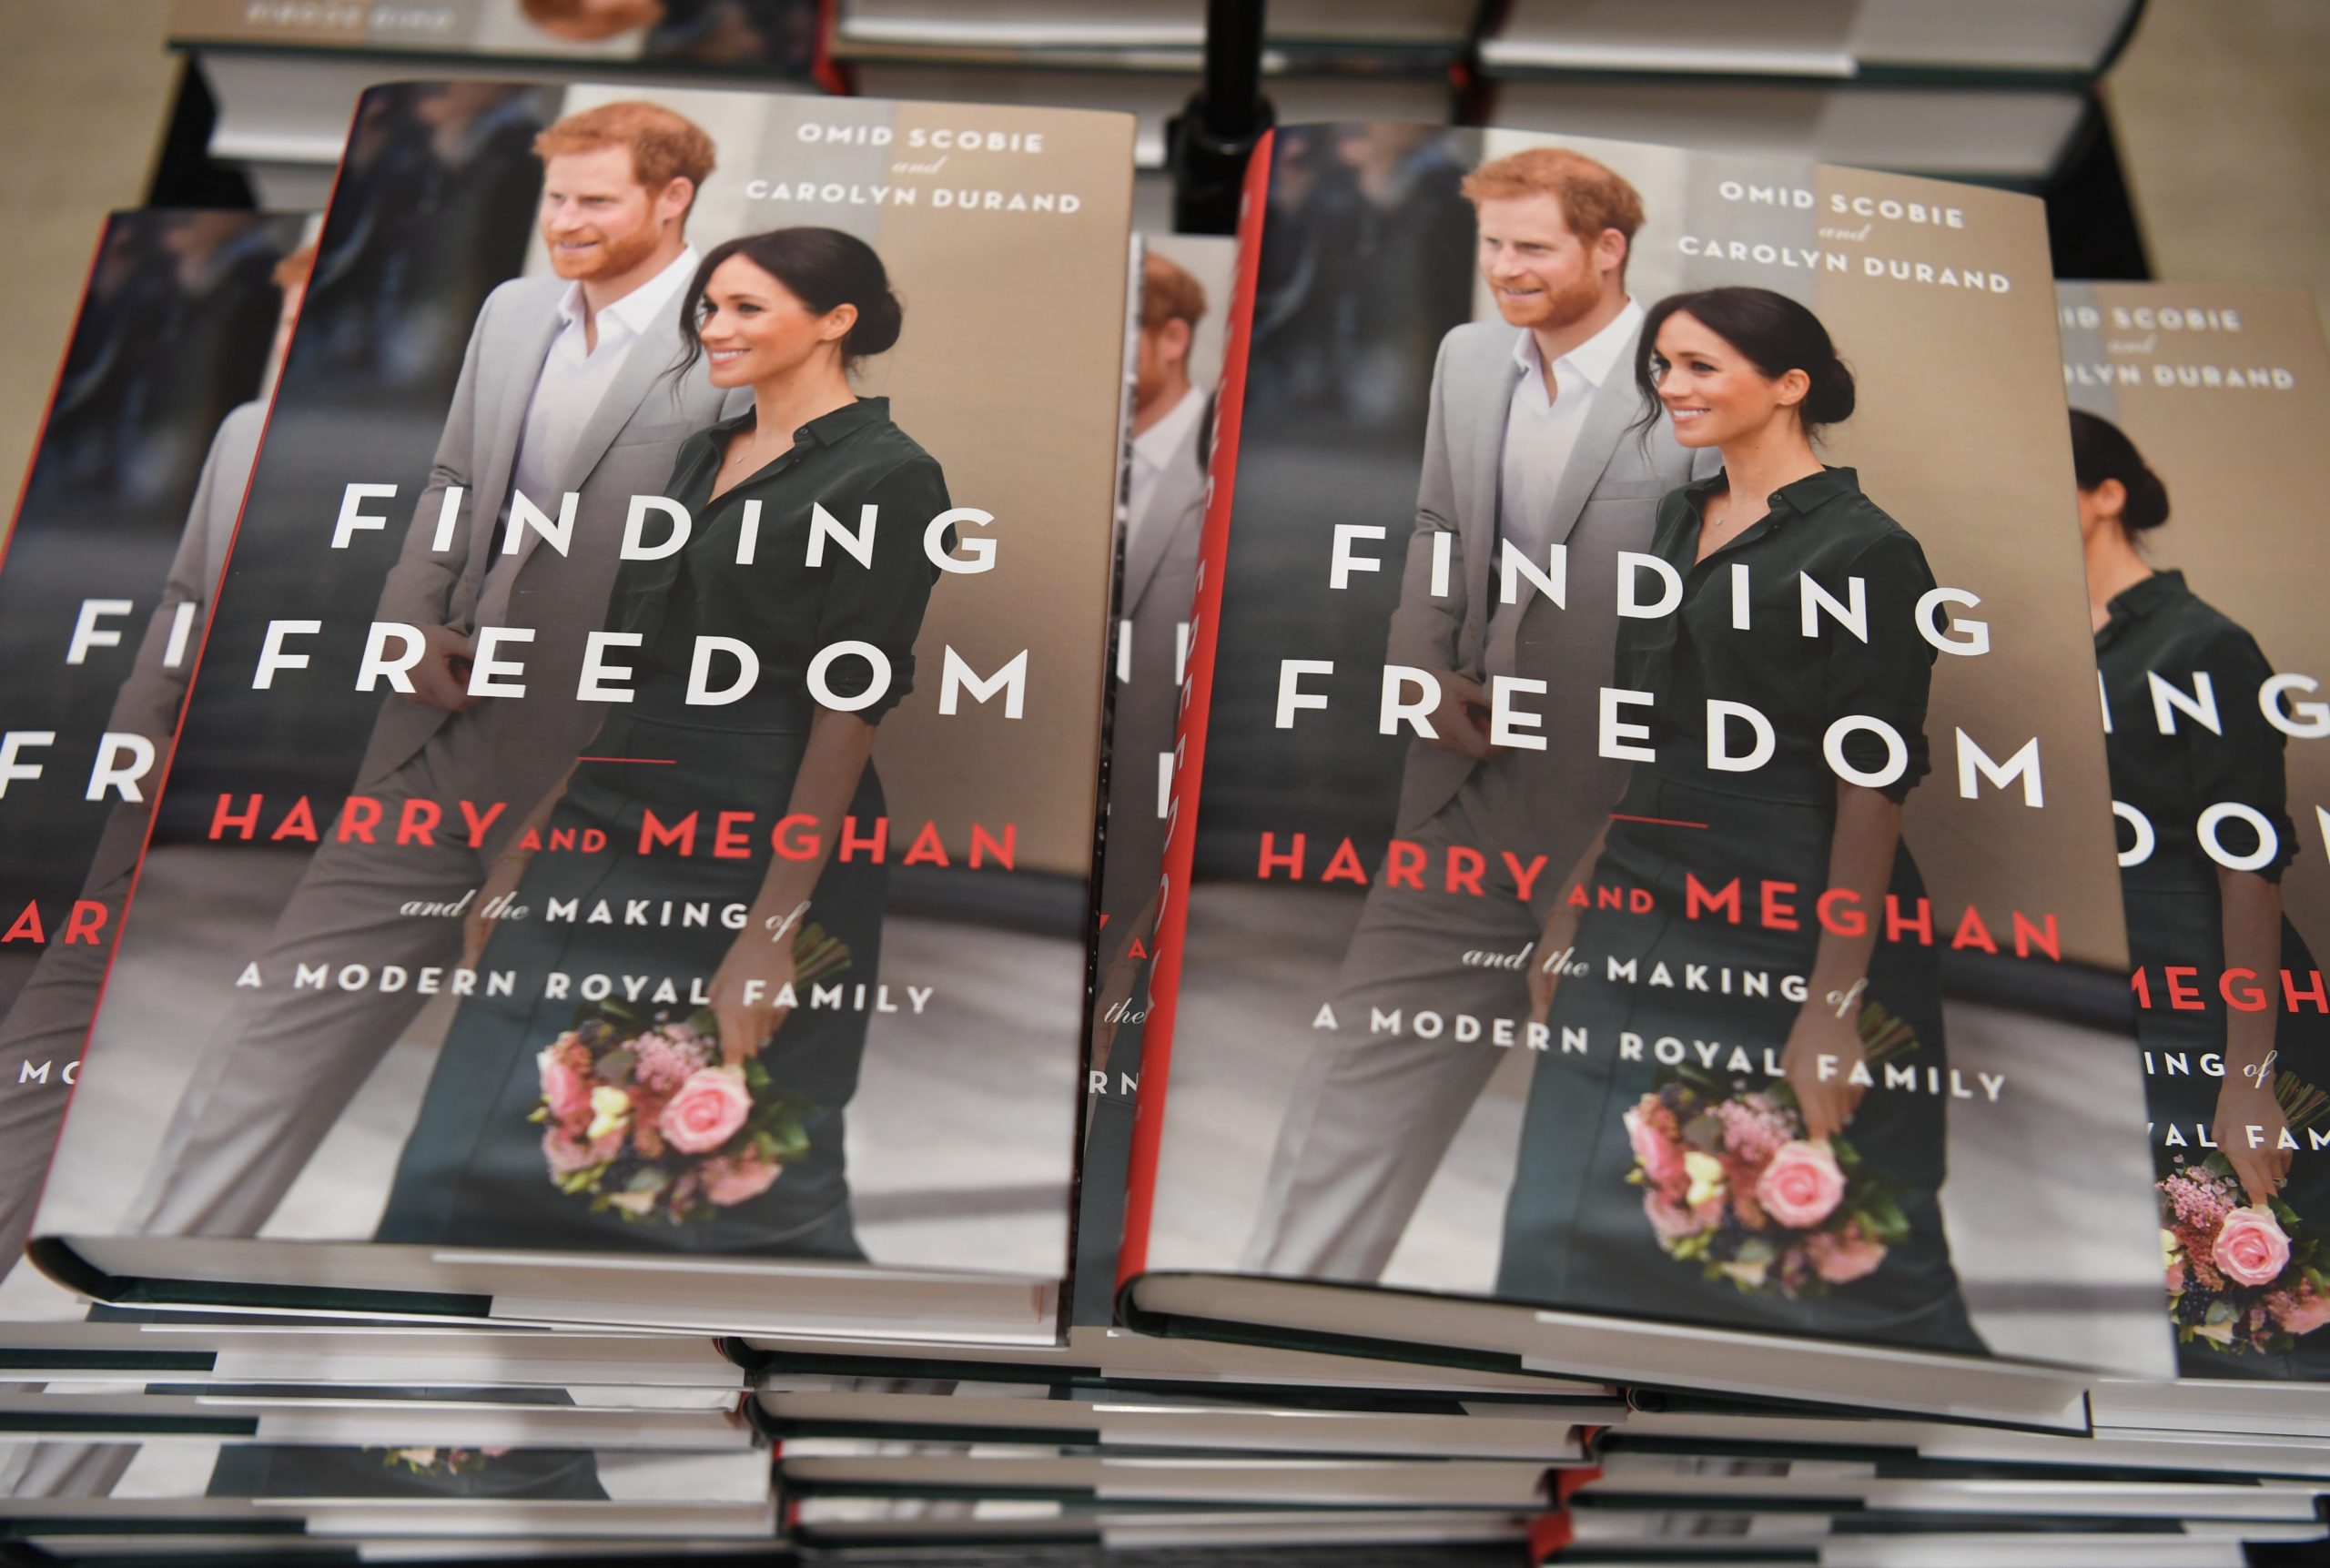 epa08597184 Copies of the book "Finding Freedom:Harry and Meghan and the Making of a Modern family" by Omid Scobie and Carolyn Durand are displayed for sale at a bookstore in London, Britain 11 August 2020. Finding Freedom is a biography of Prince Harry and Meghan Markle, the Duke and Duchess of Sussex promising reactions about Britain's Royal family. The book is released on 11 August 2020.  EPA/NEIL HALL